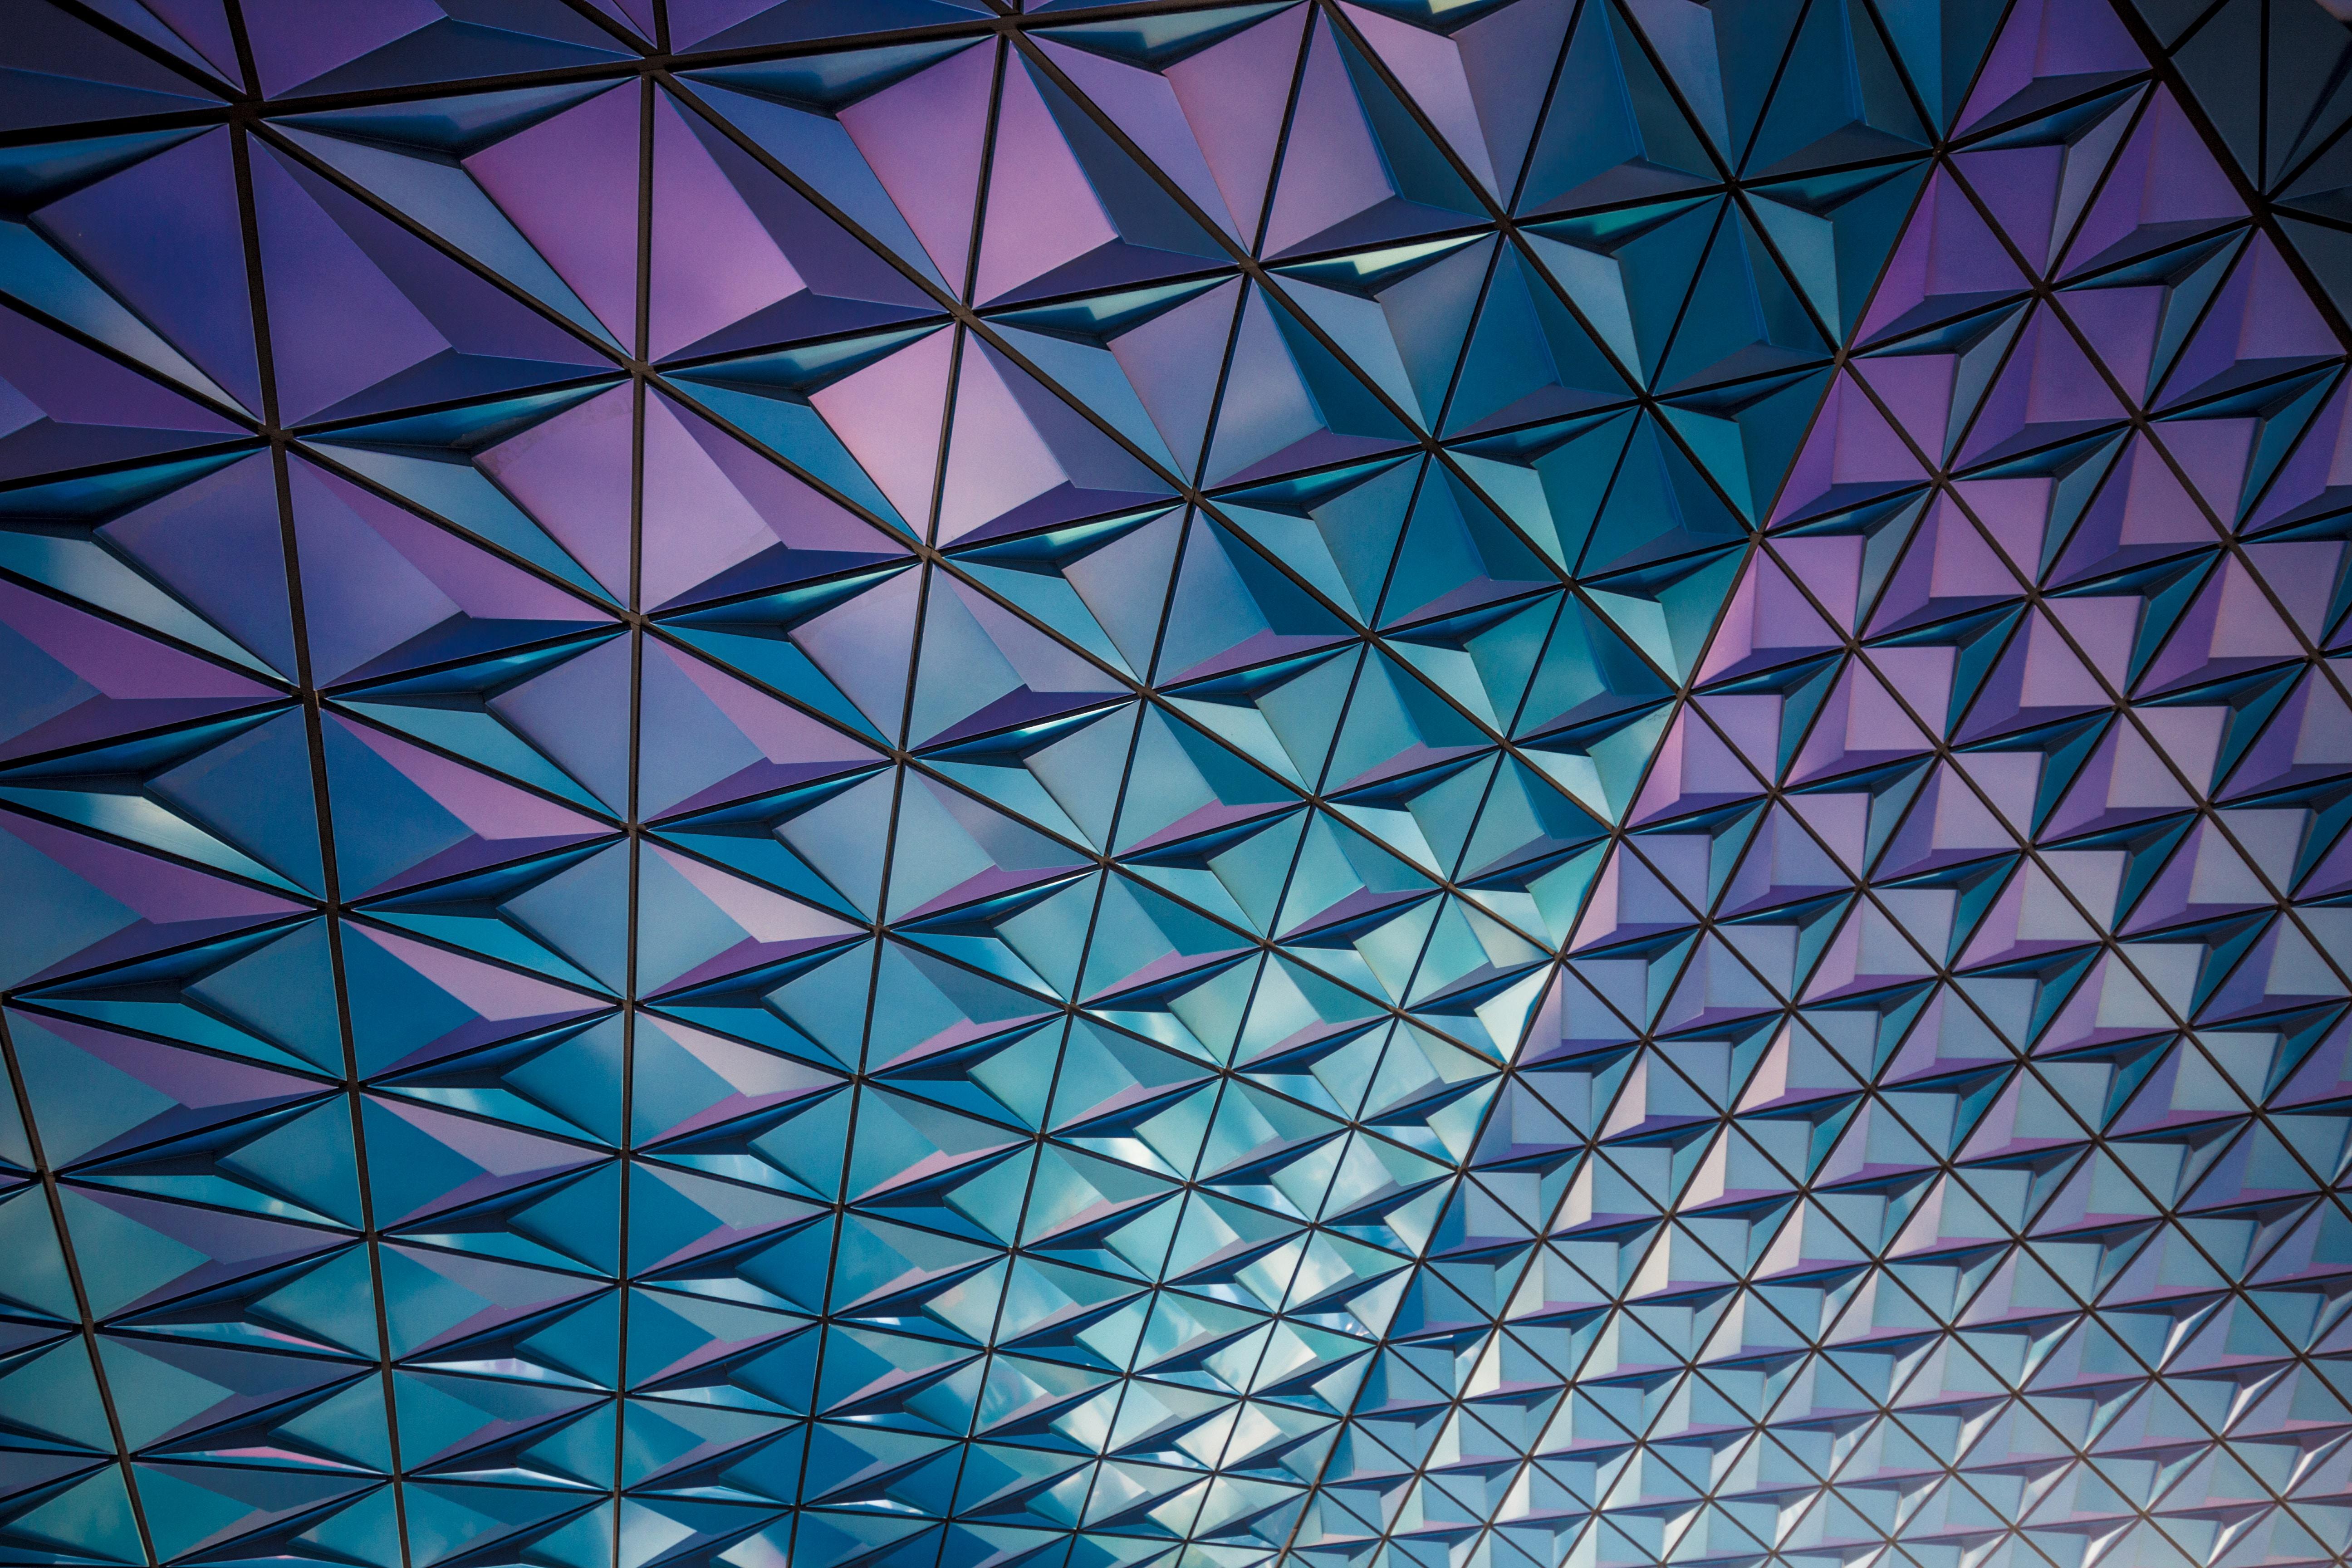 Days of Awesome Wallpaper: Geometric and Architectural